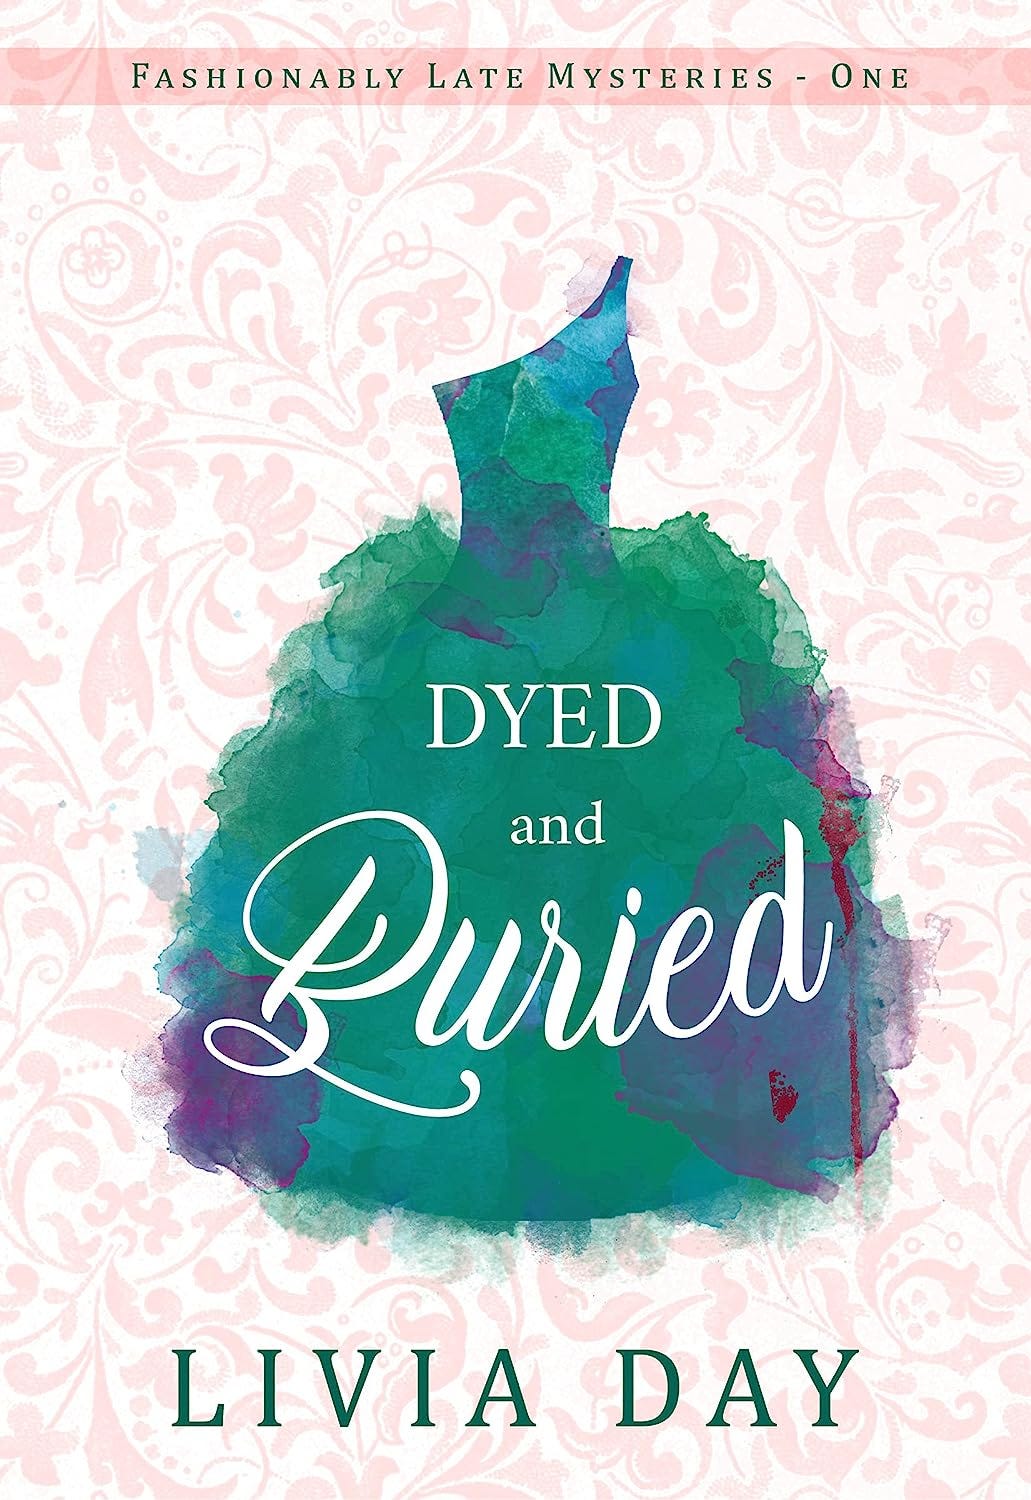 Dyed and Buried cover: a purple, green, and just slightly bloodstained one shoulder wedding dress with a full puffy skirt is rendered in water colours against a light pink and white floral background.